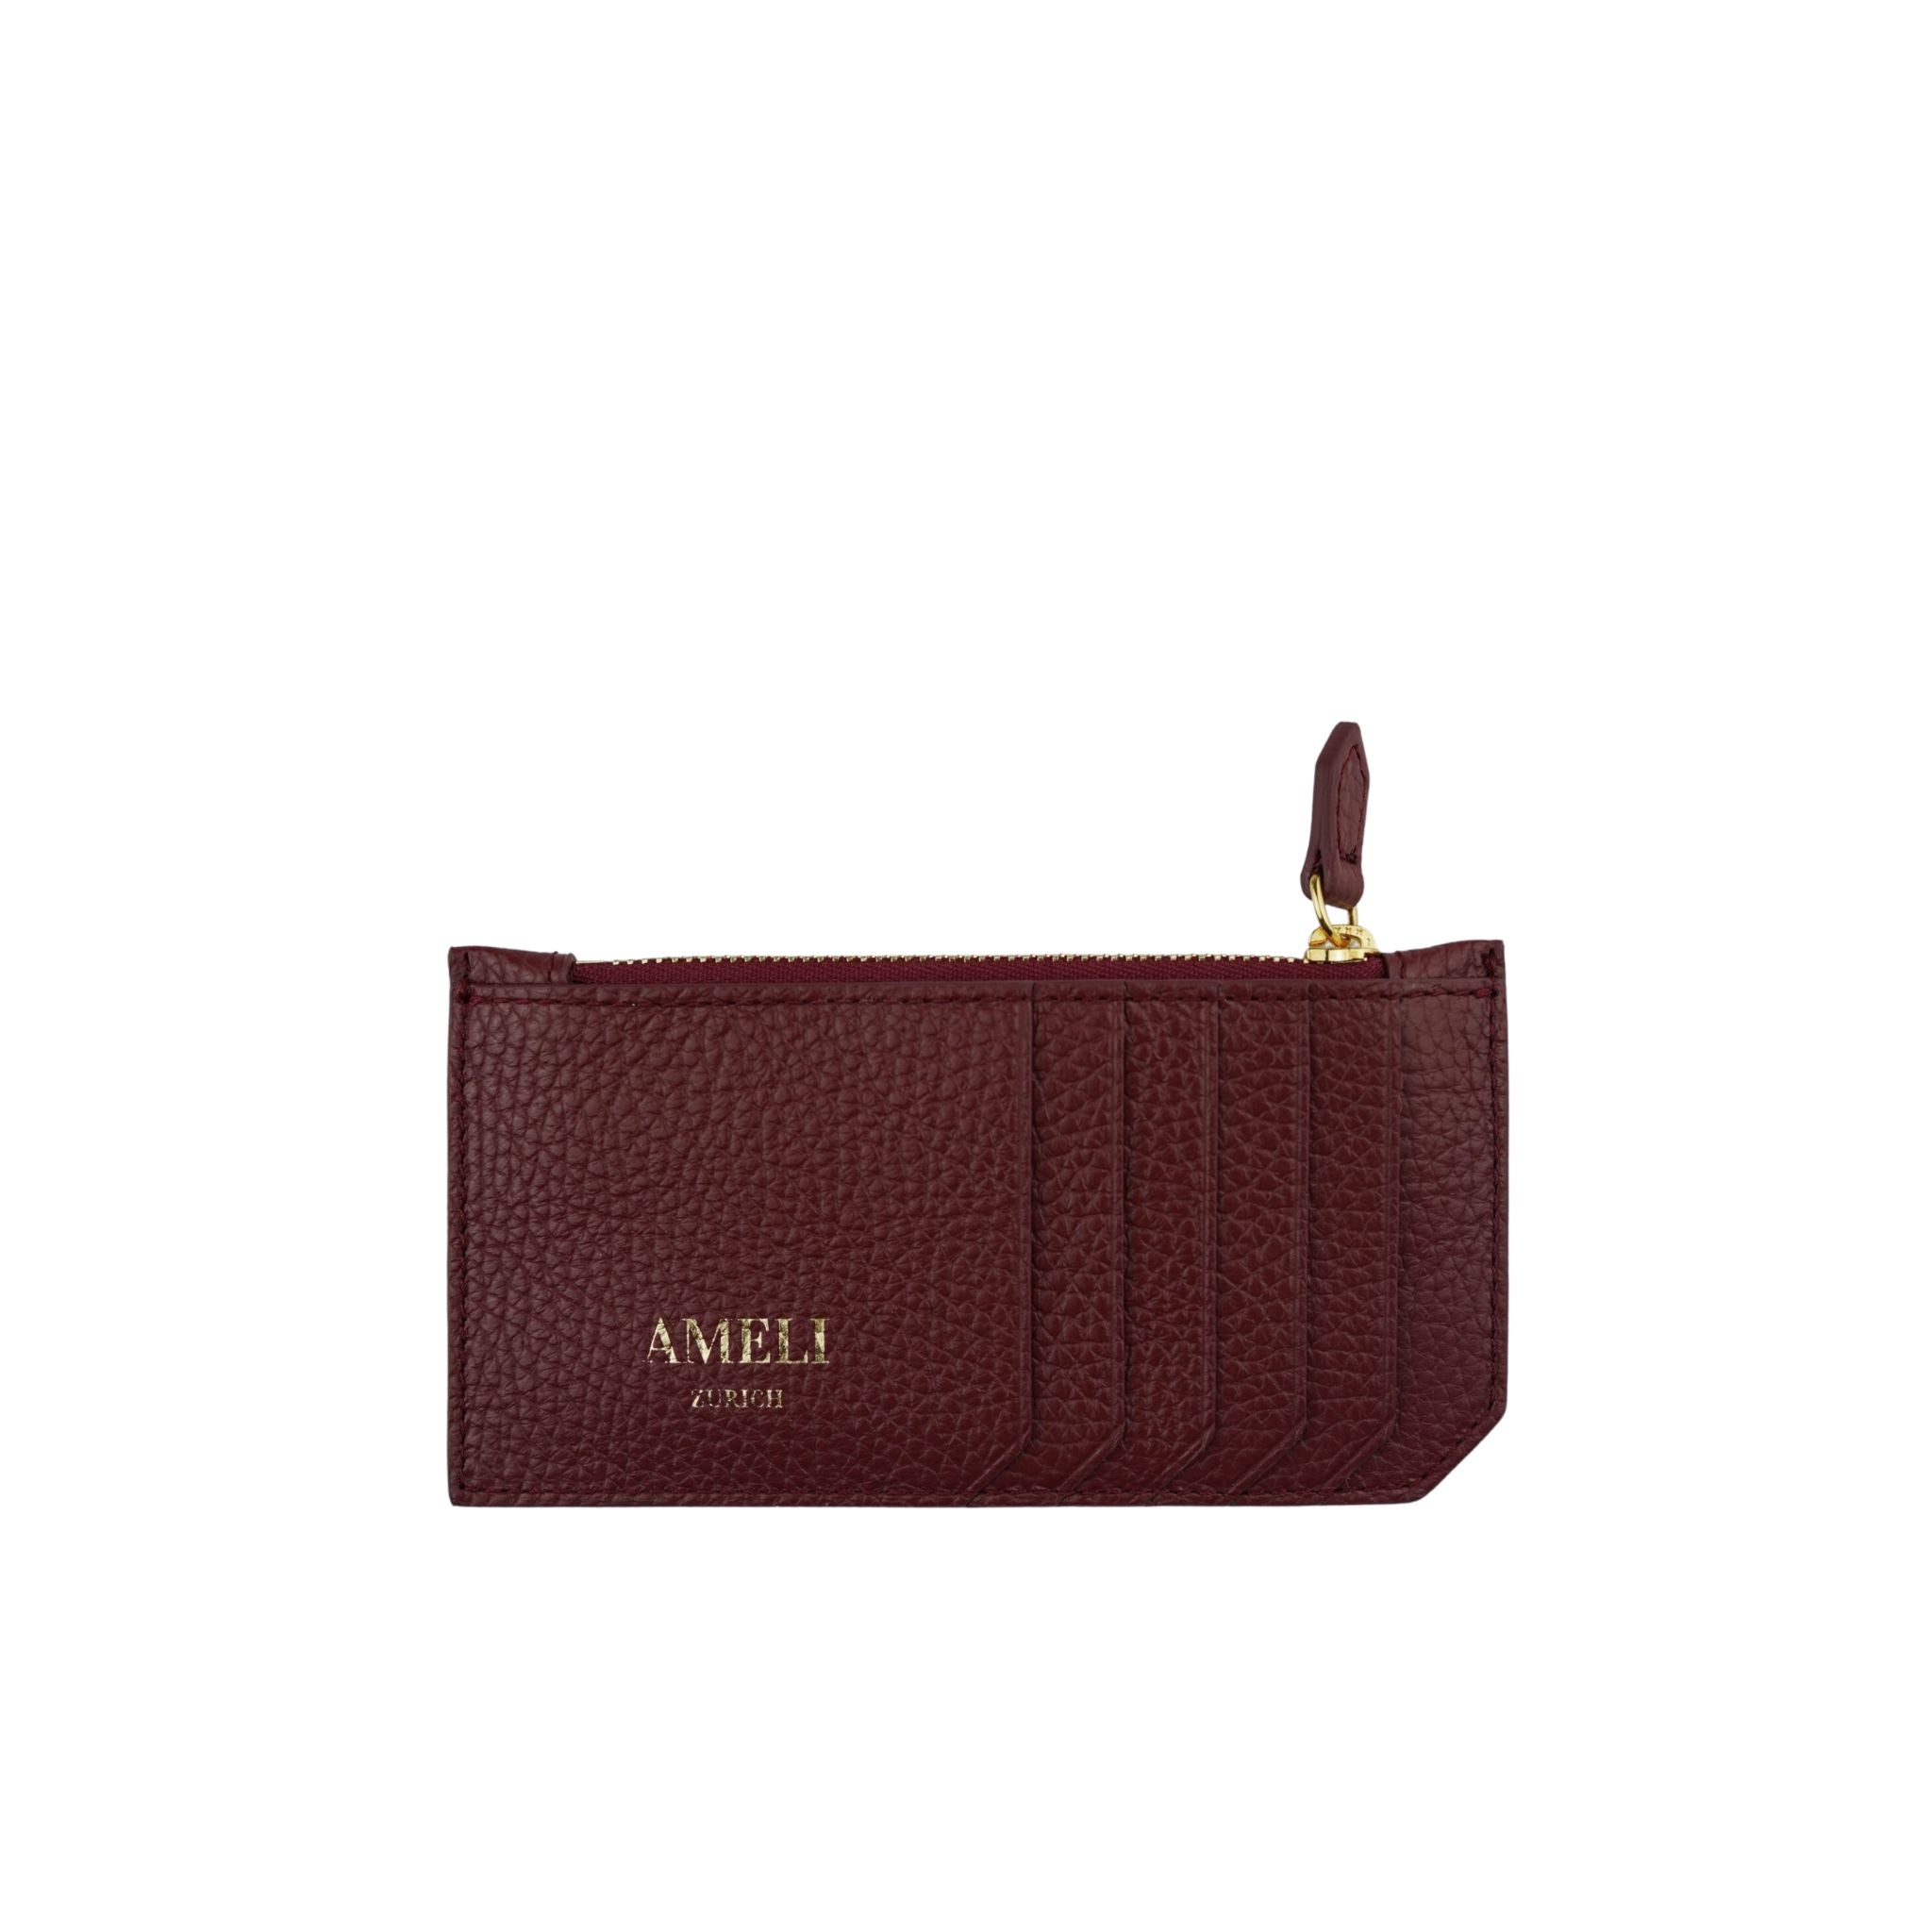 AMELI Zurich | Card holder | Maroon Red | Soft Grain Leather | Front